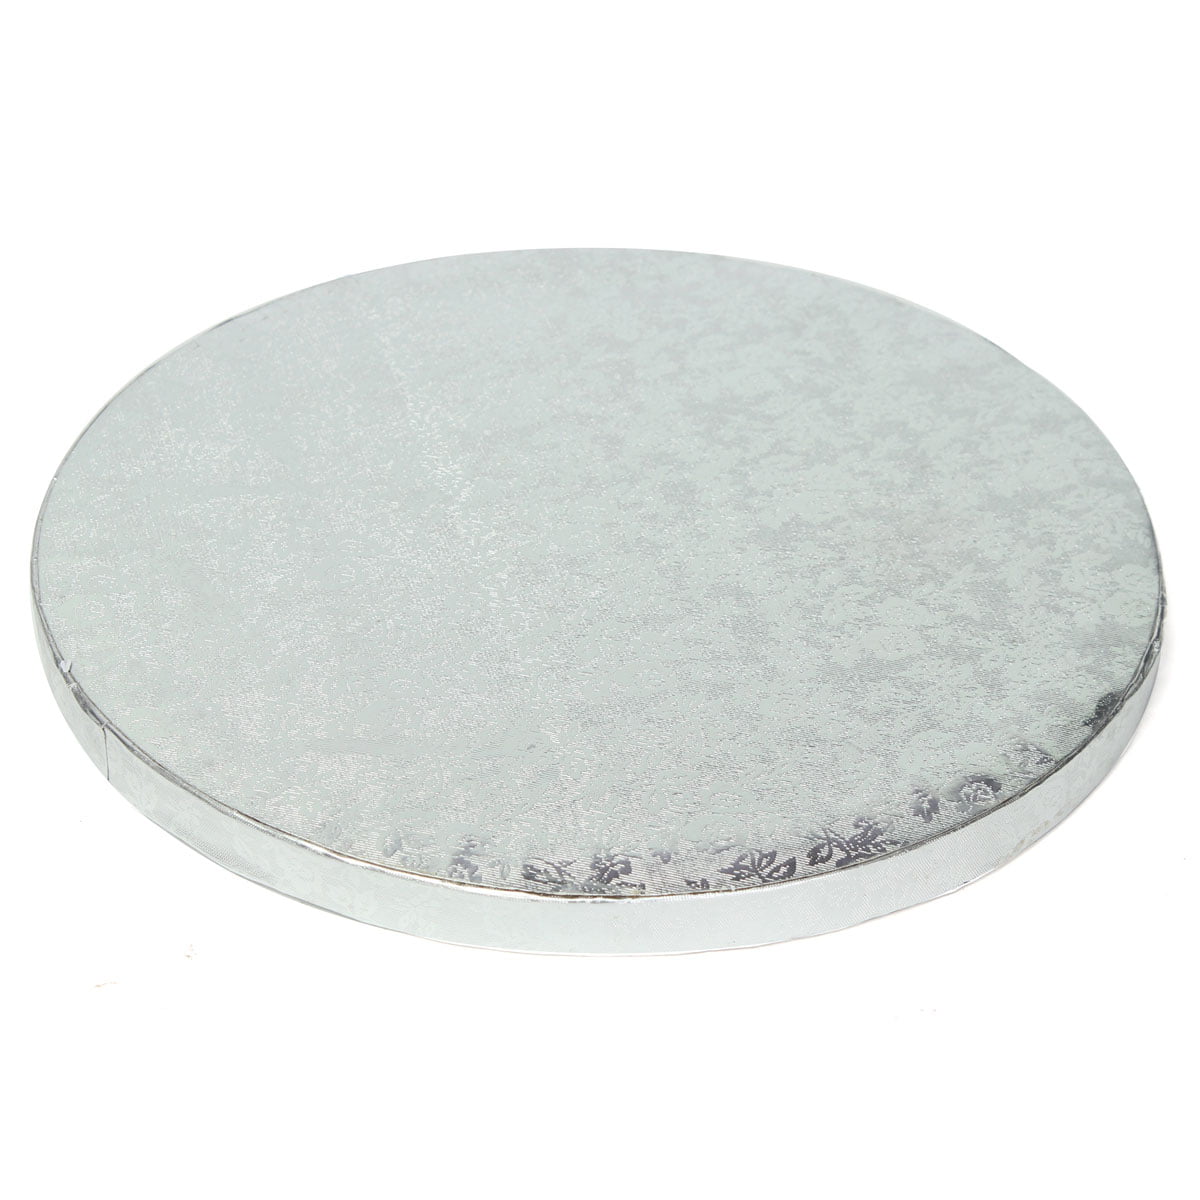 Cake Drum Boards 8 Inch Silver Round Baking Base for Home Parties Weddings Birthdays Cupcakes